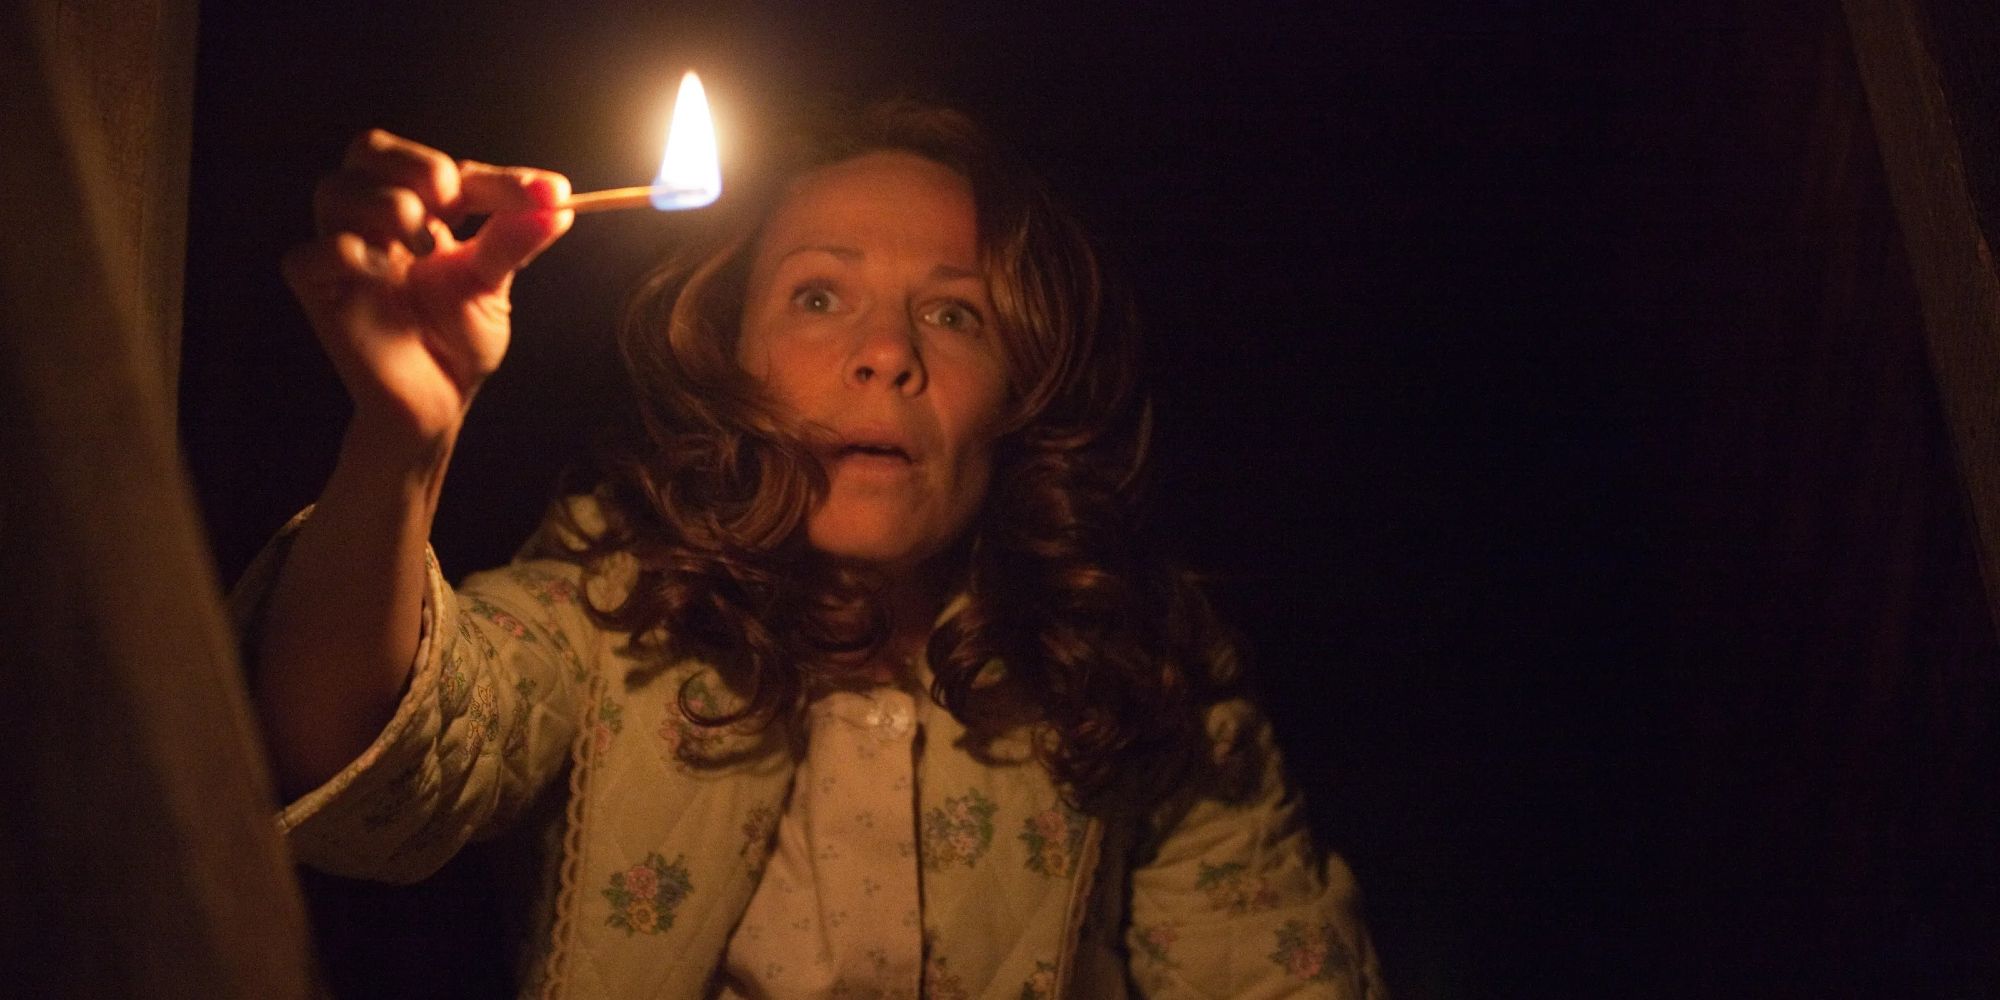 Lili Taylor as Carolyn Perron holding a lit match in the dark in The Conjuring